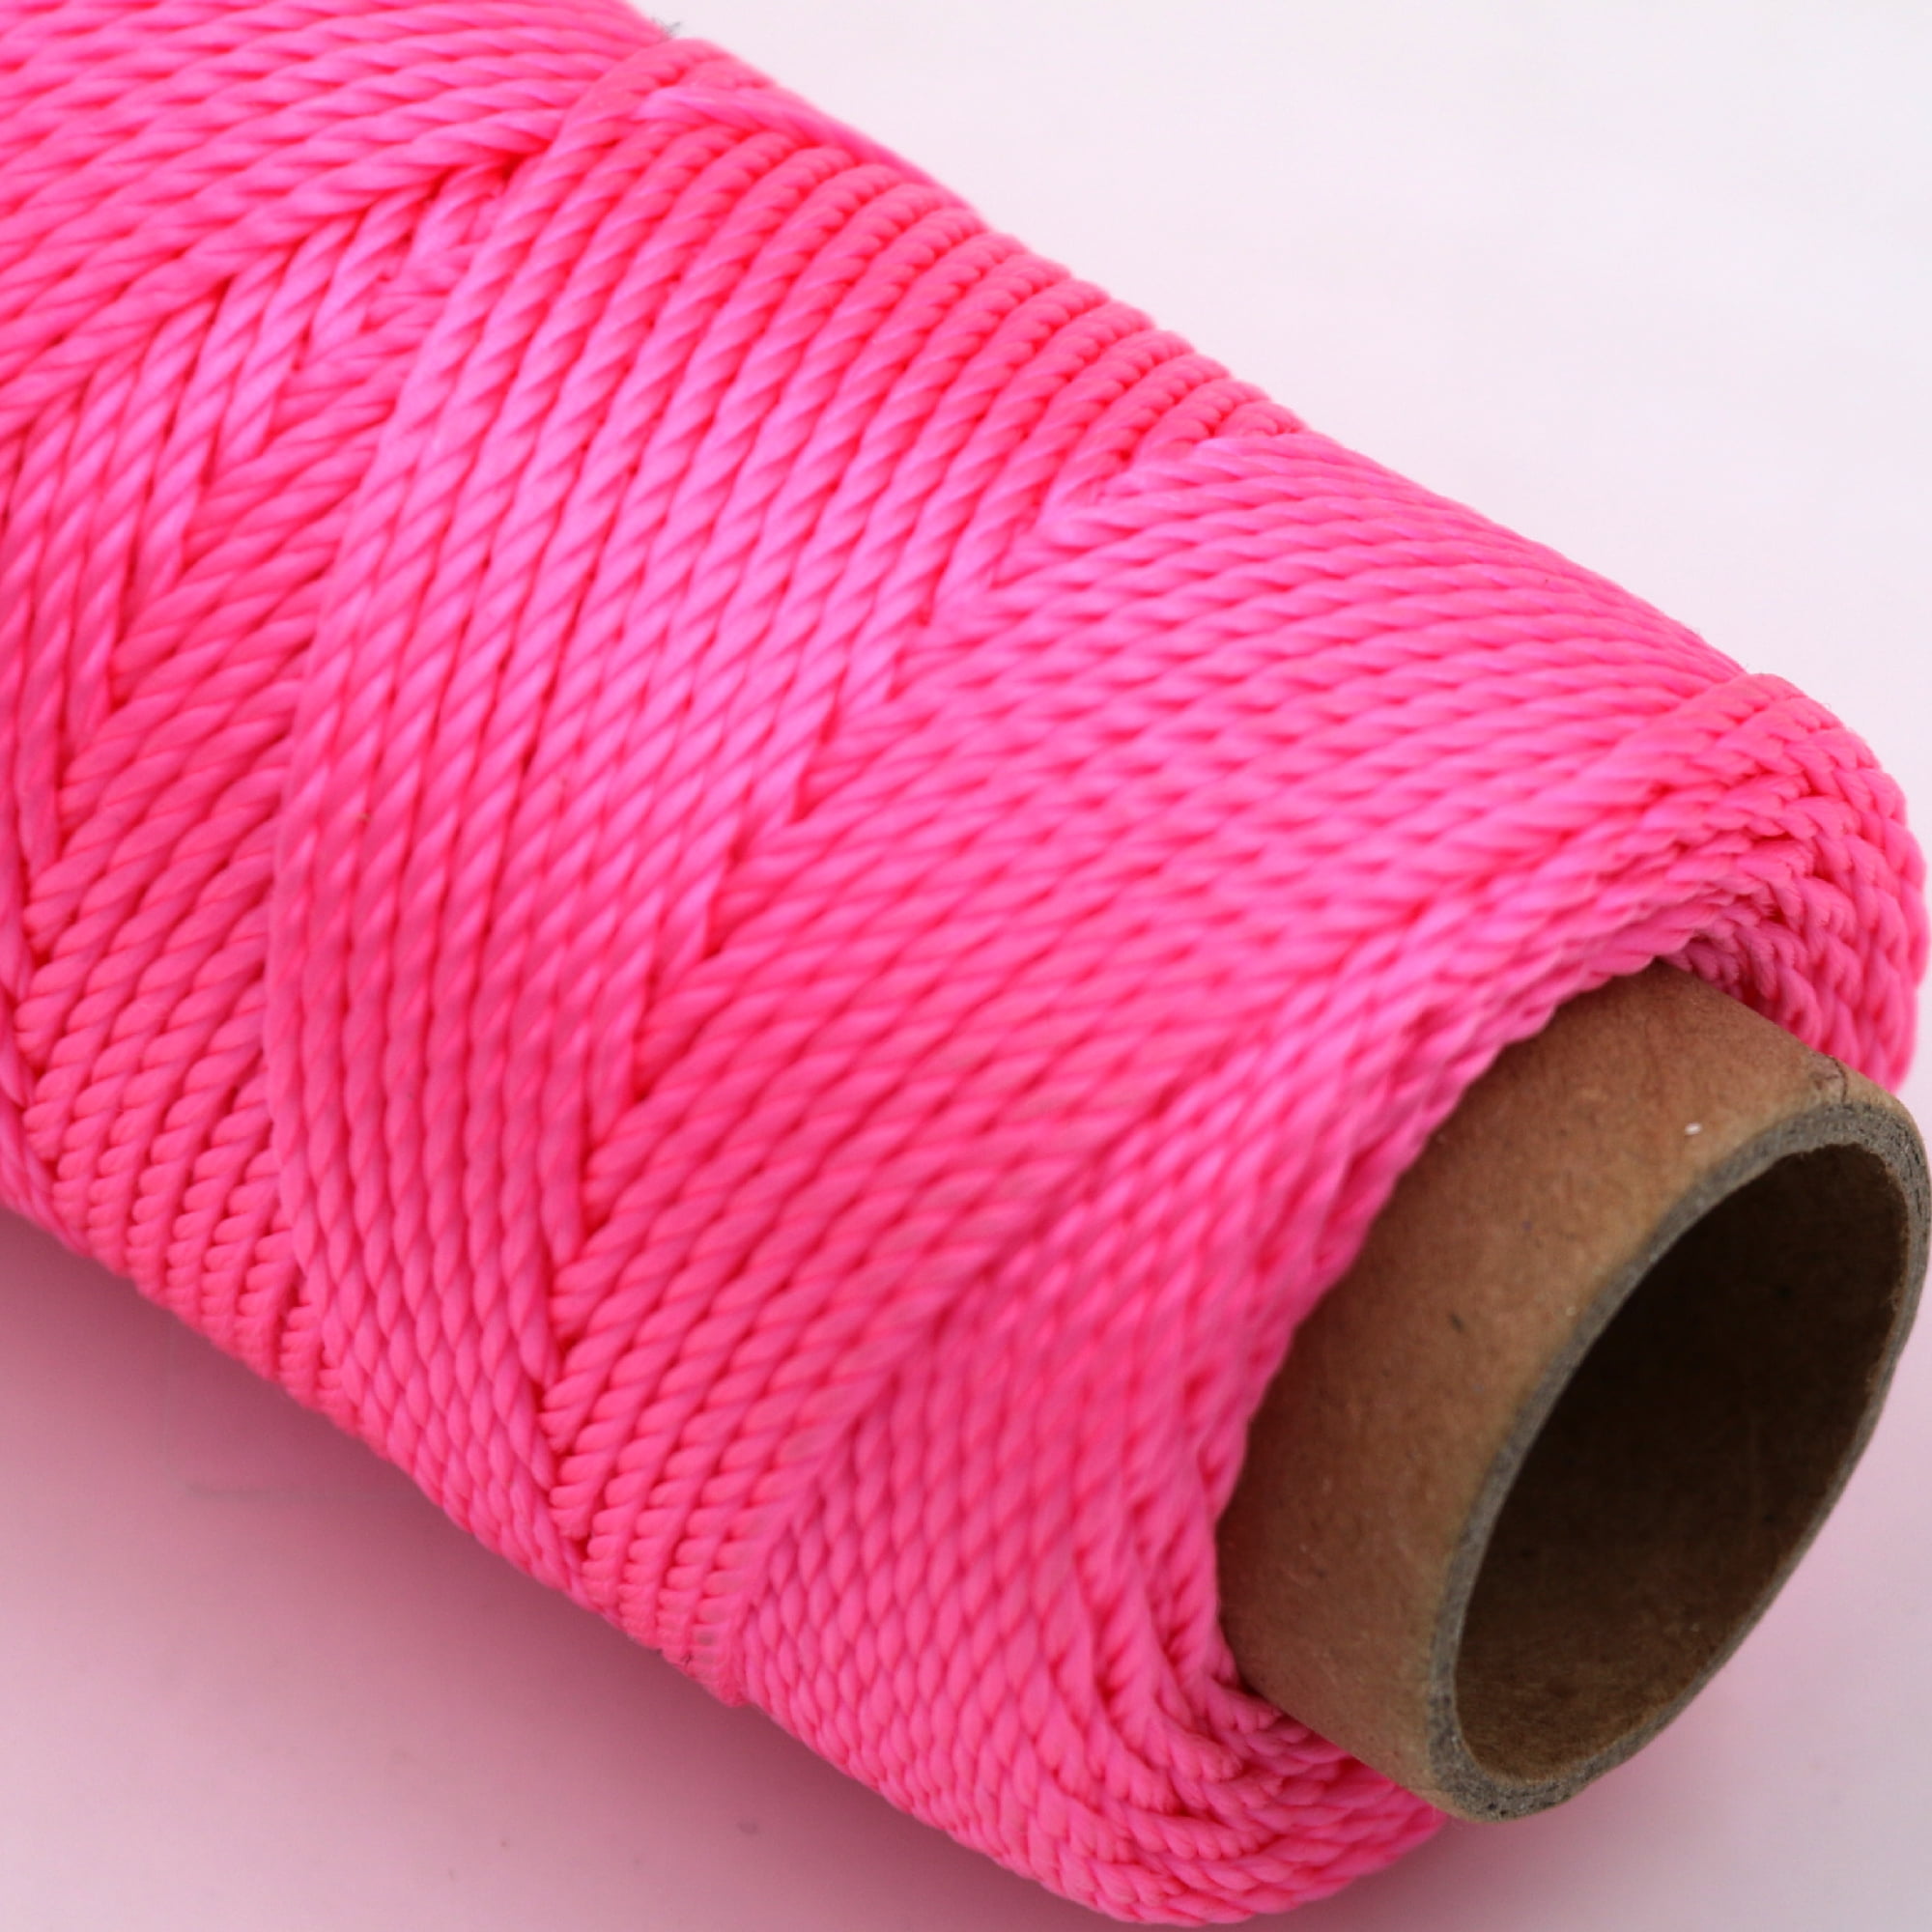 Construction 1000-Feet Twisted Nylon Pink String Line Lacing Twine